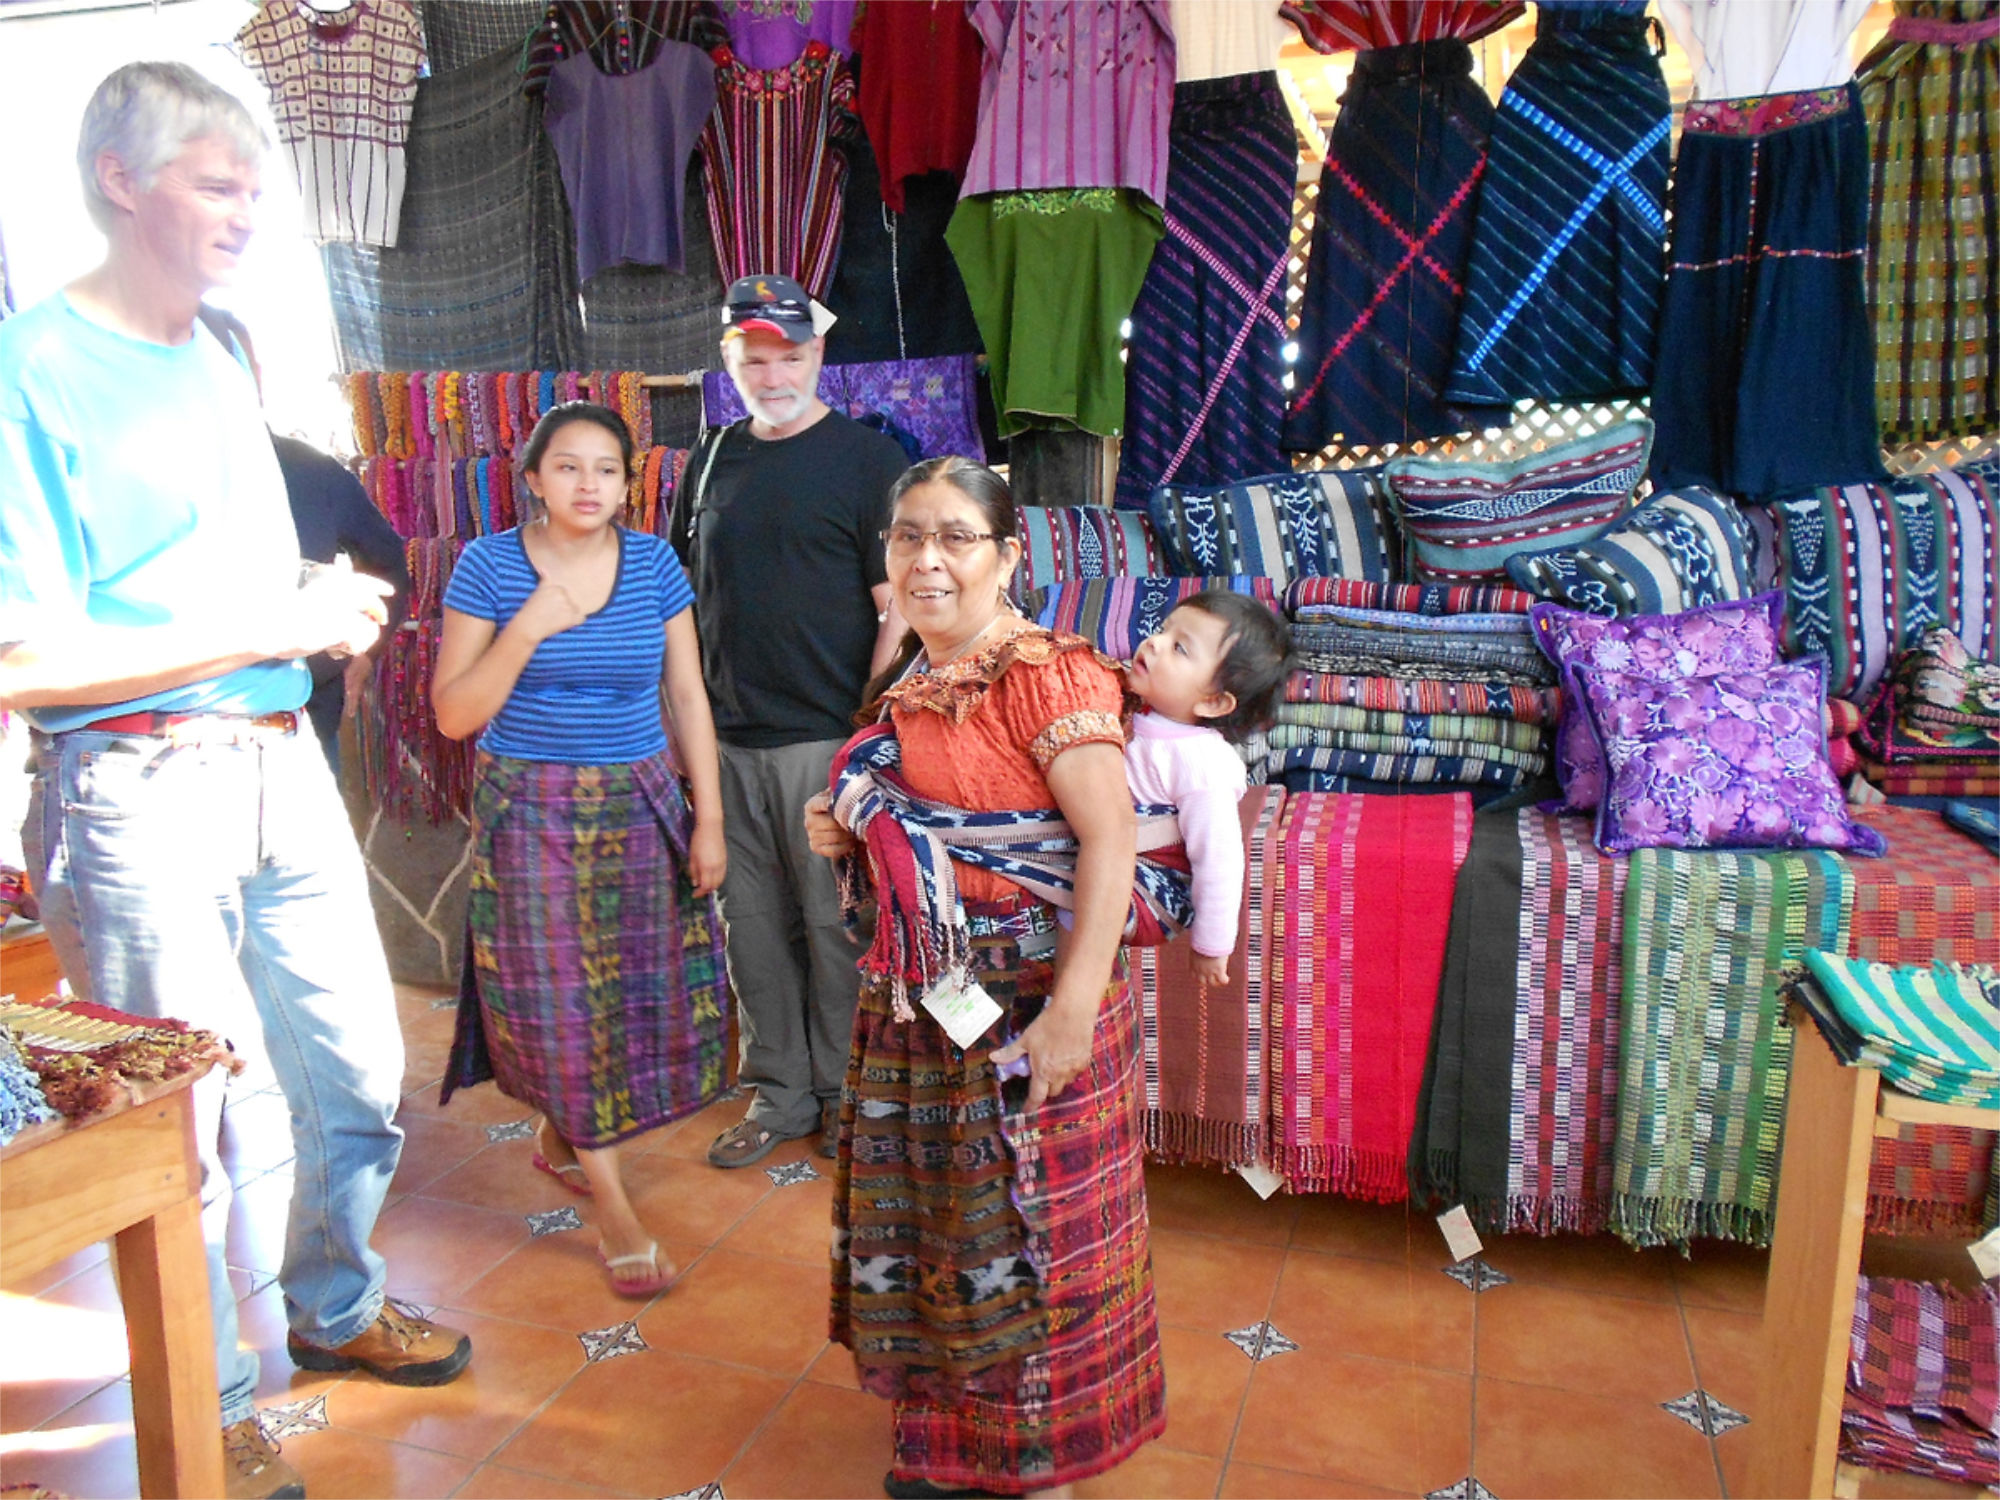 Group of people standing a textiles booth at a market